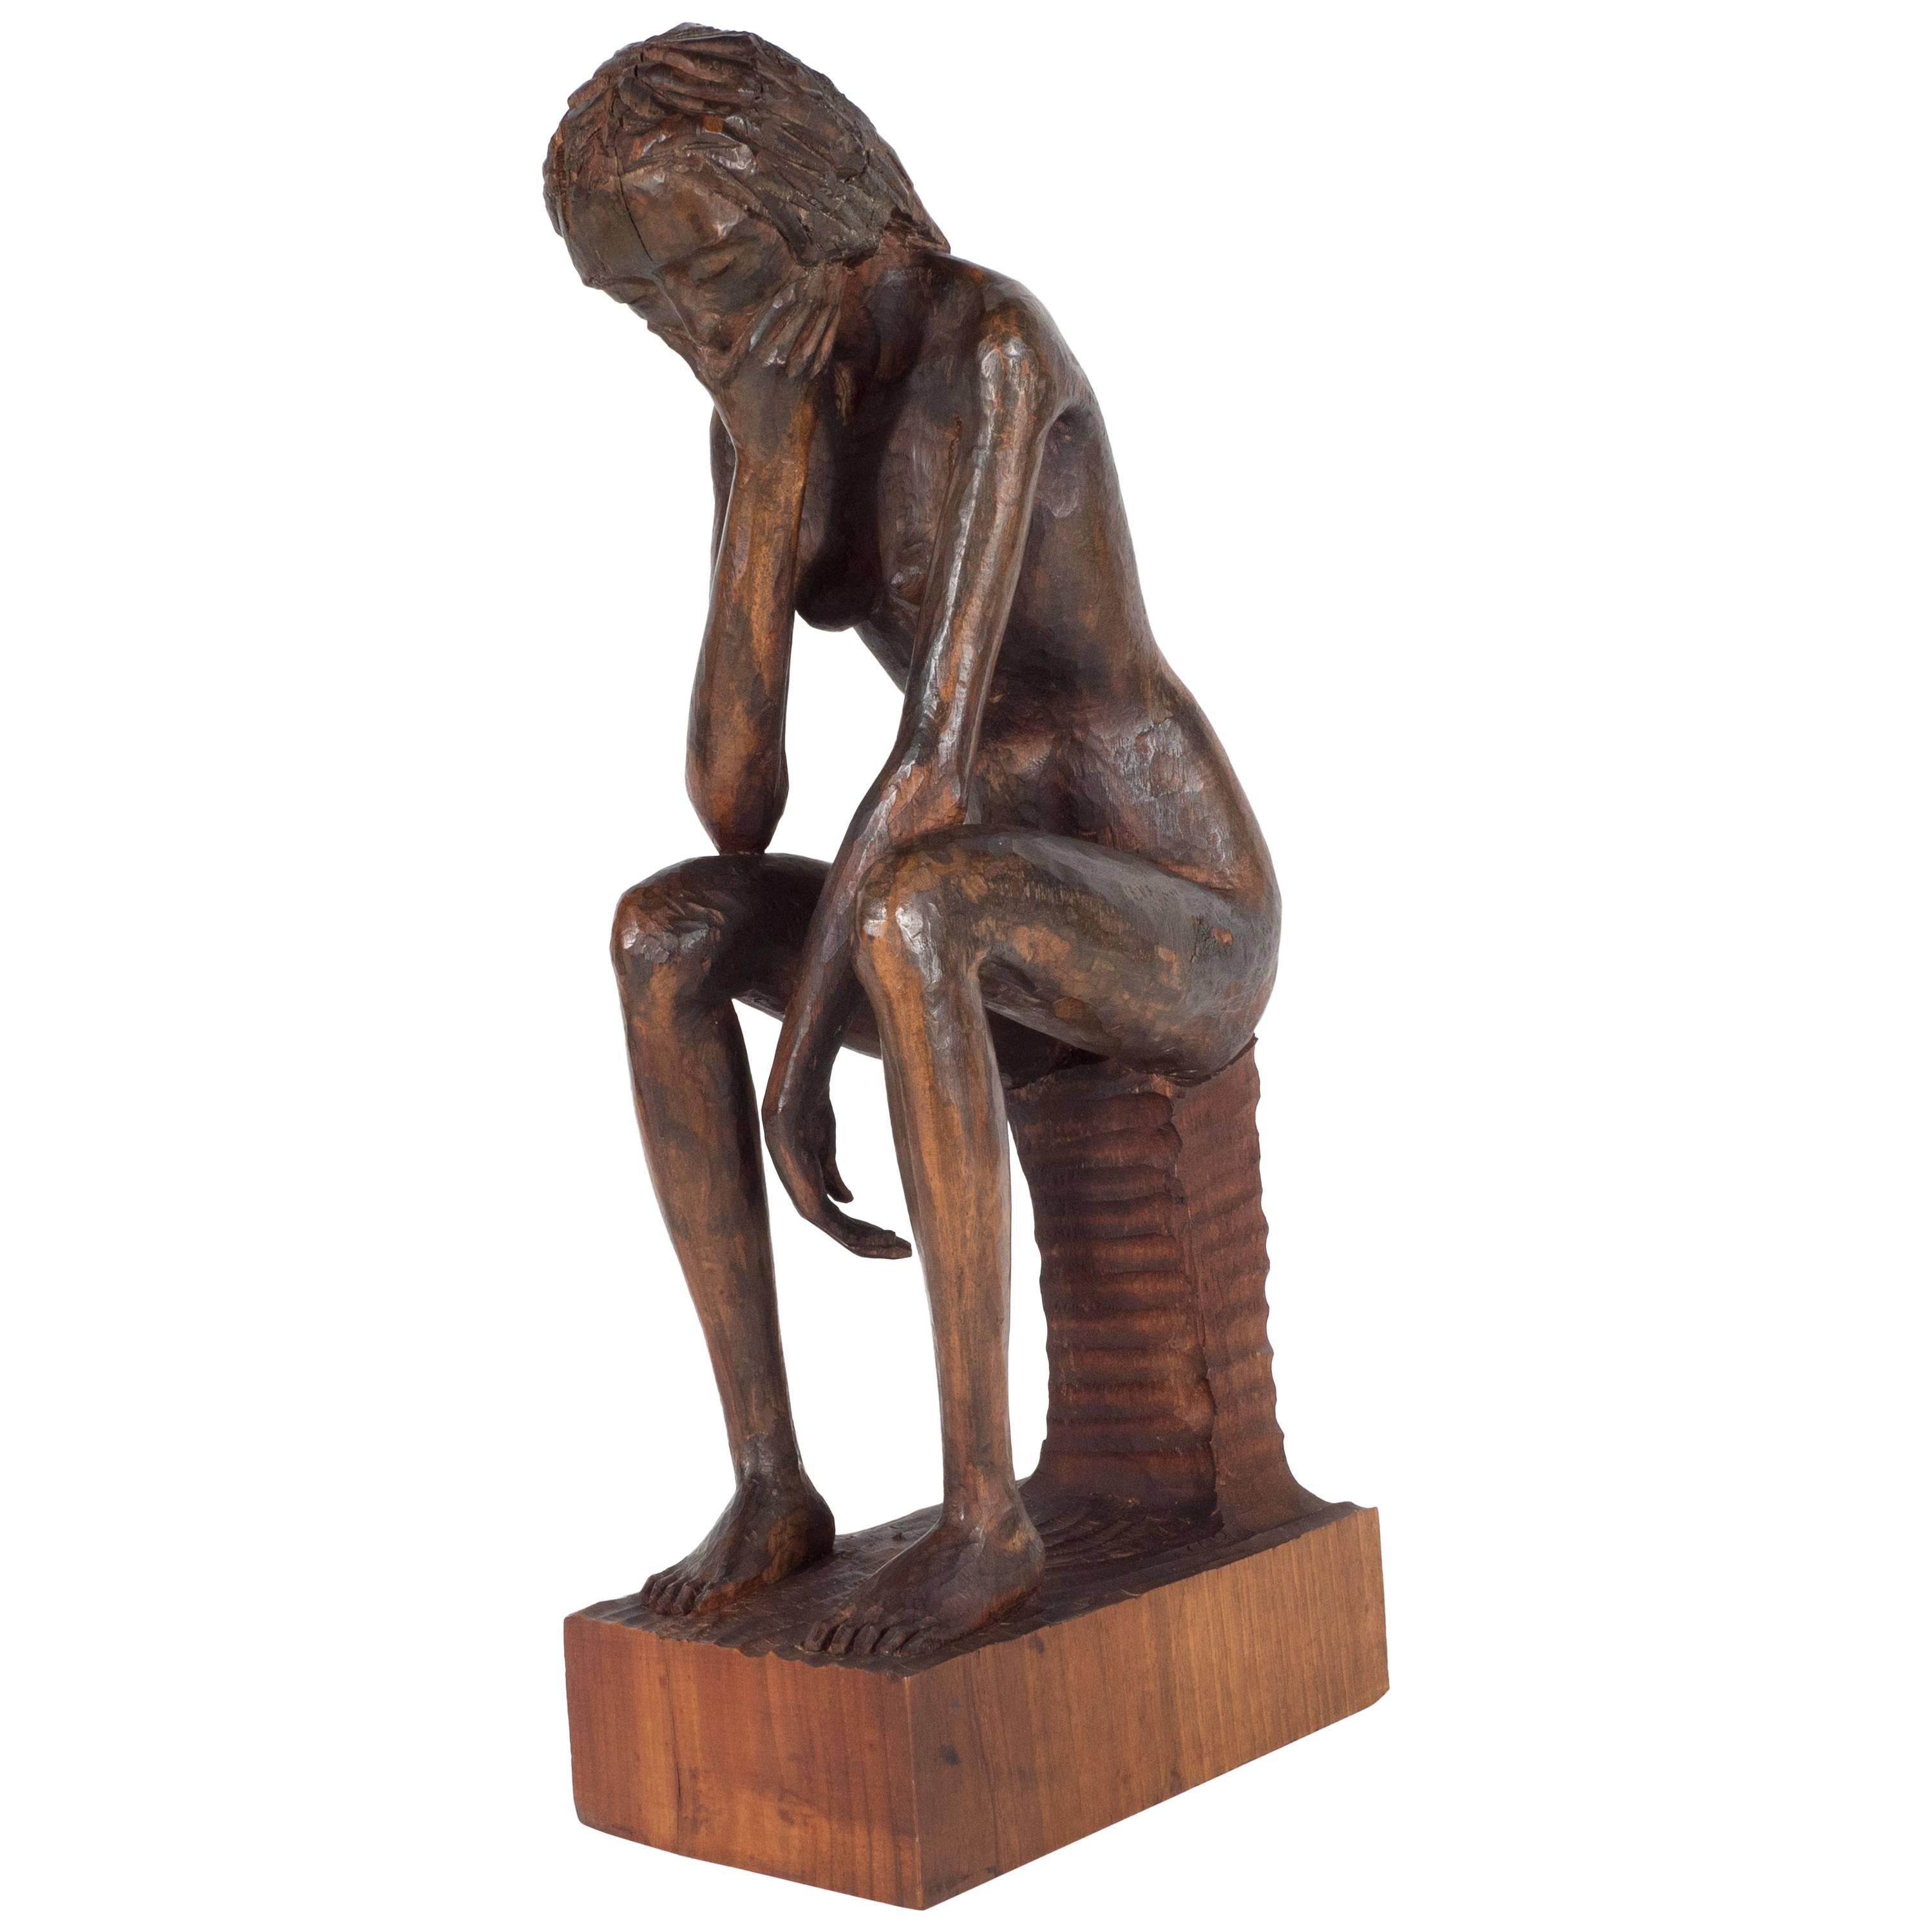 Hand-Carved Wood Contemplative Seated Nude Sculpture by Aldo Calo